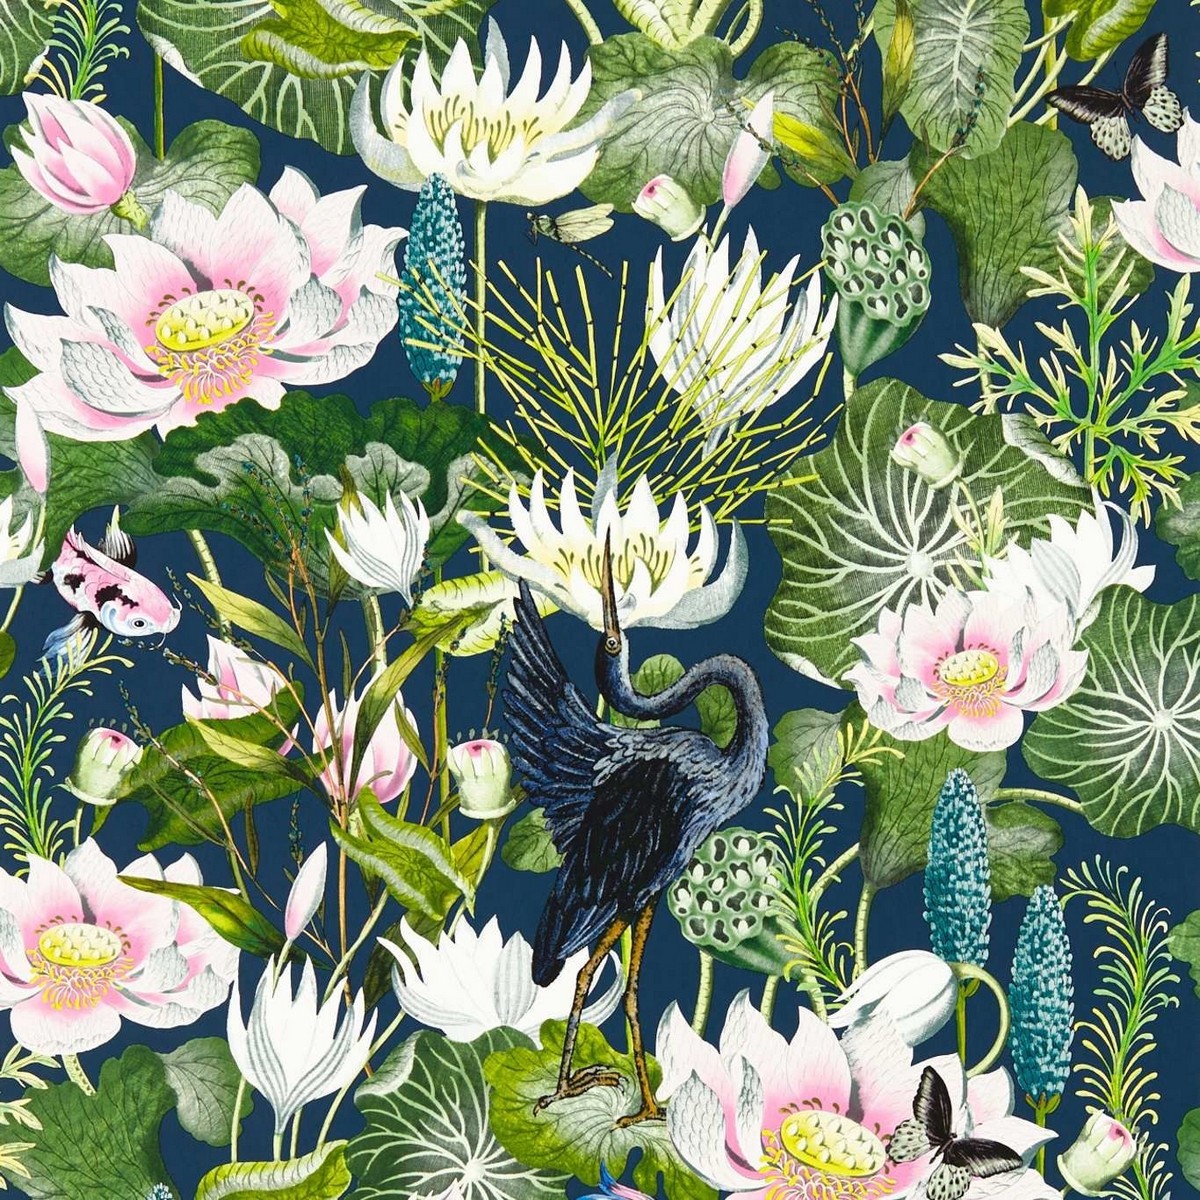 Waterlily Midnight Fabric by Wedgwood